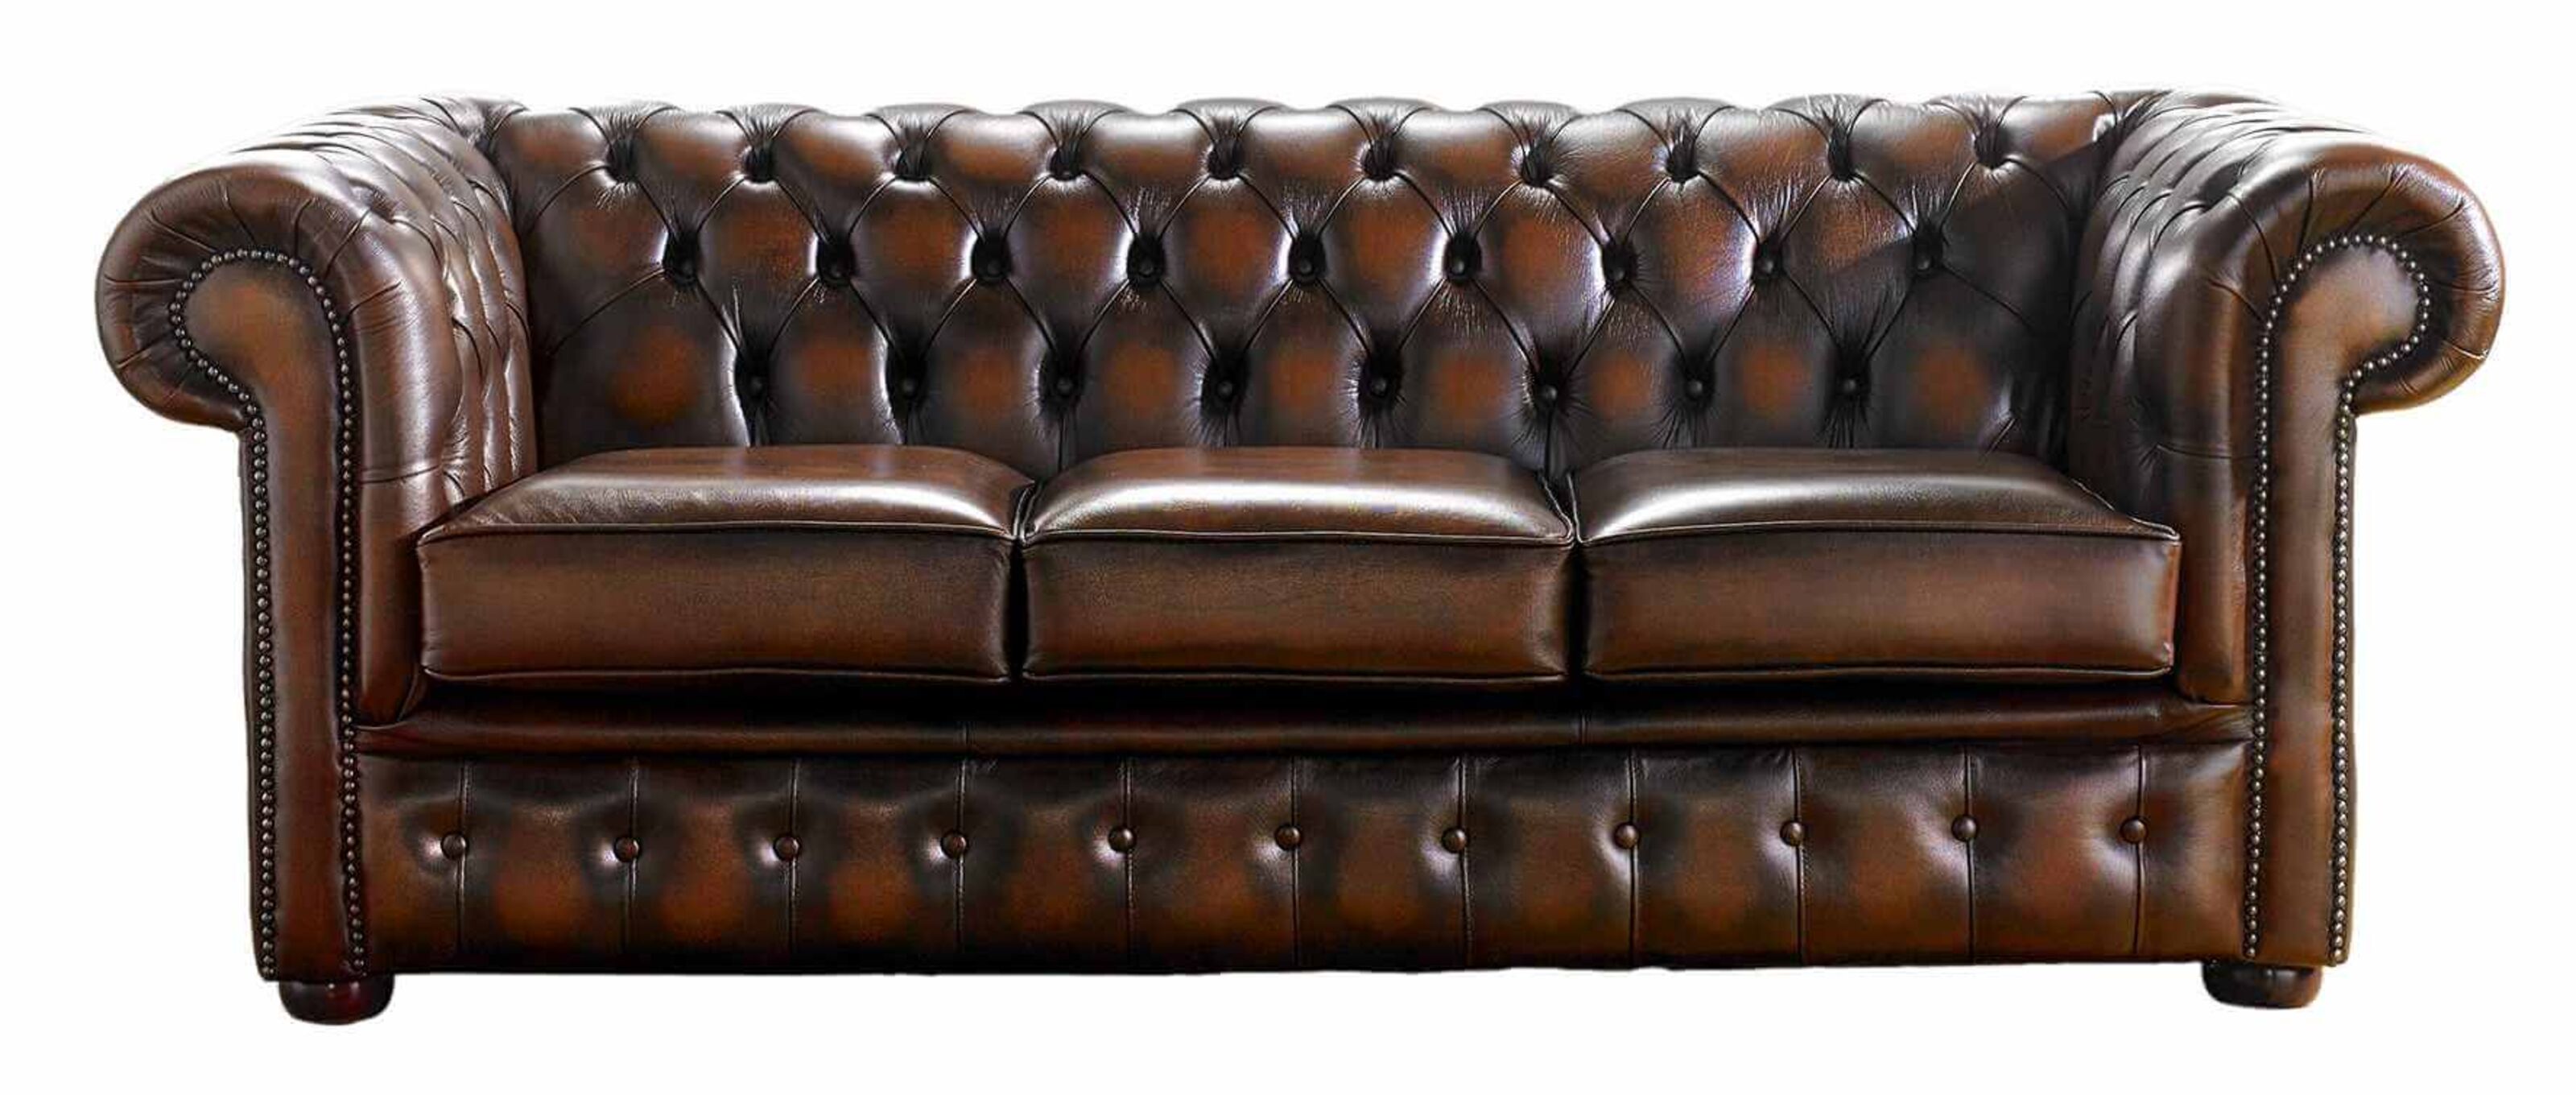 Timeless Elegance: Discover Our Exquisite Chesterfields, Crafted by Sofa Experts  %Post Title